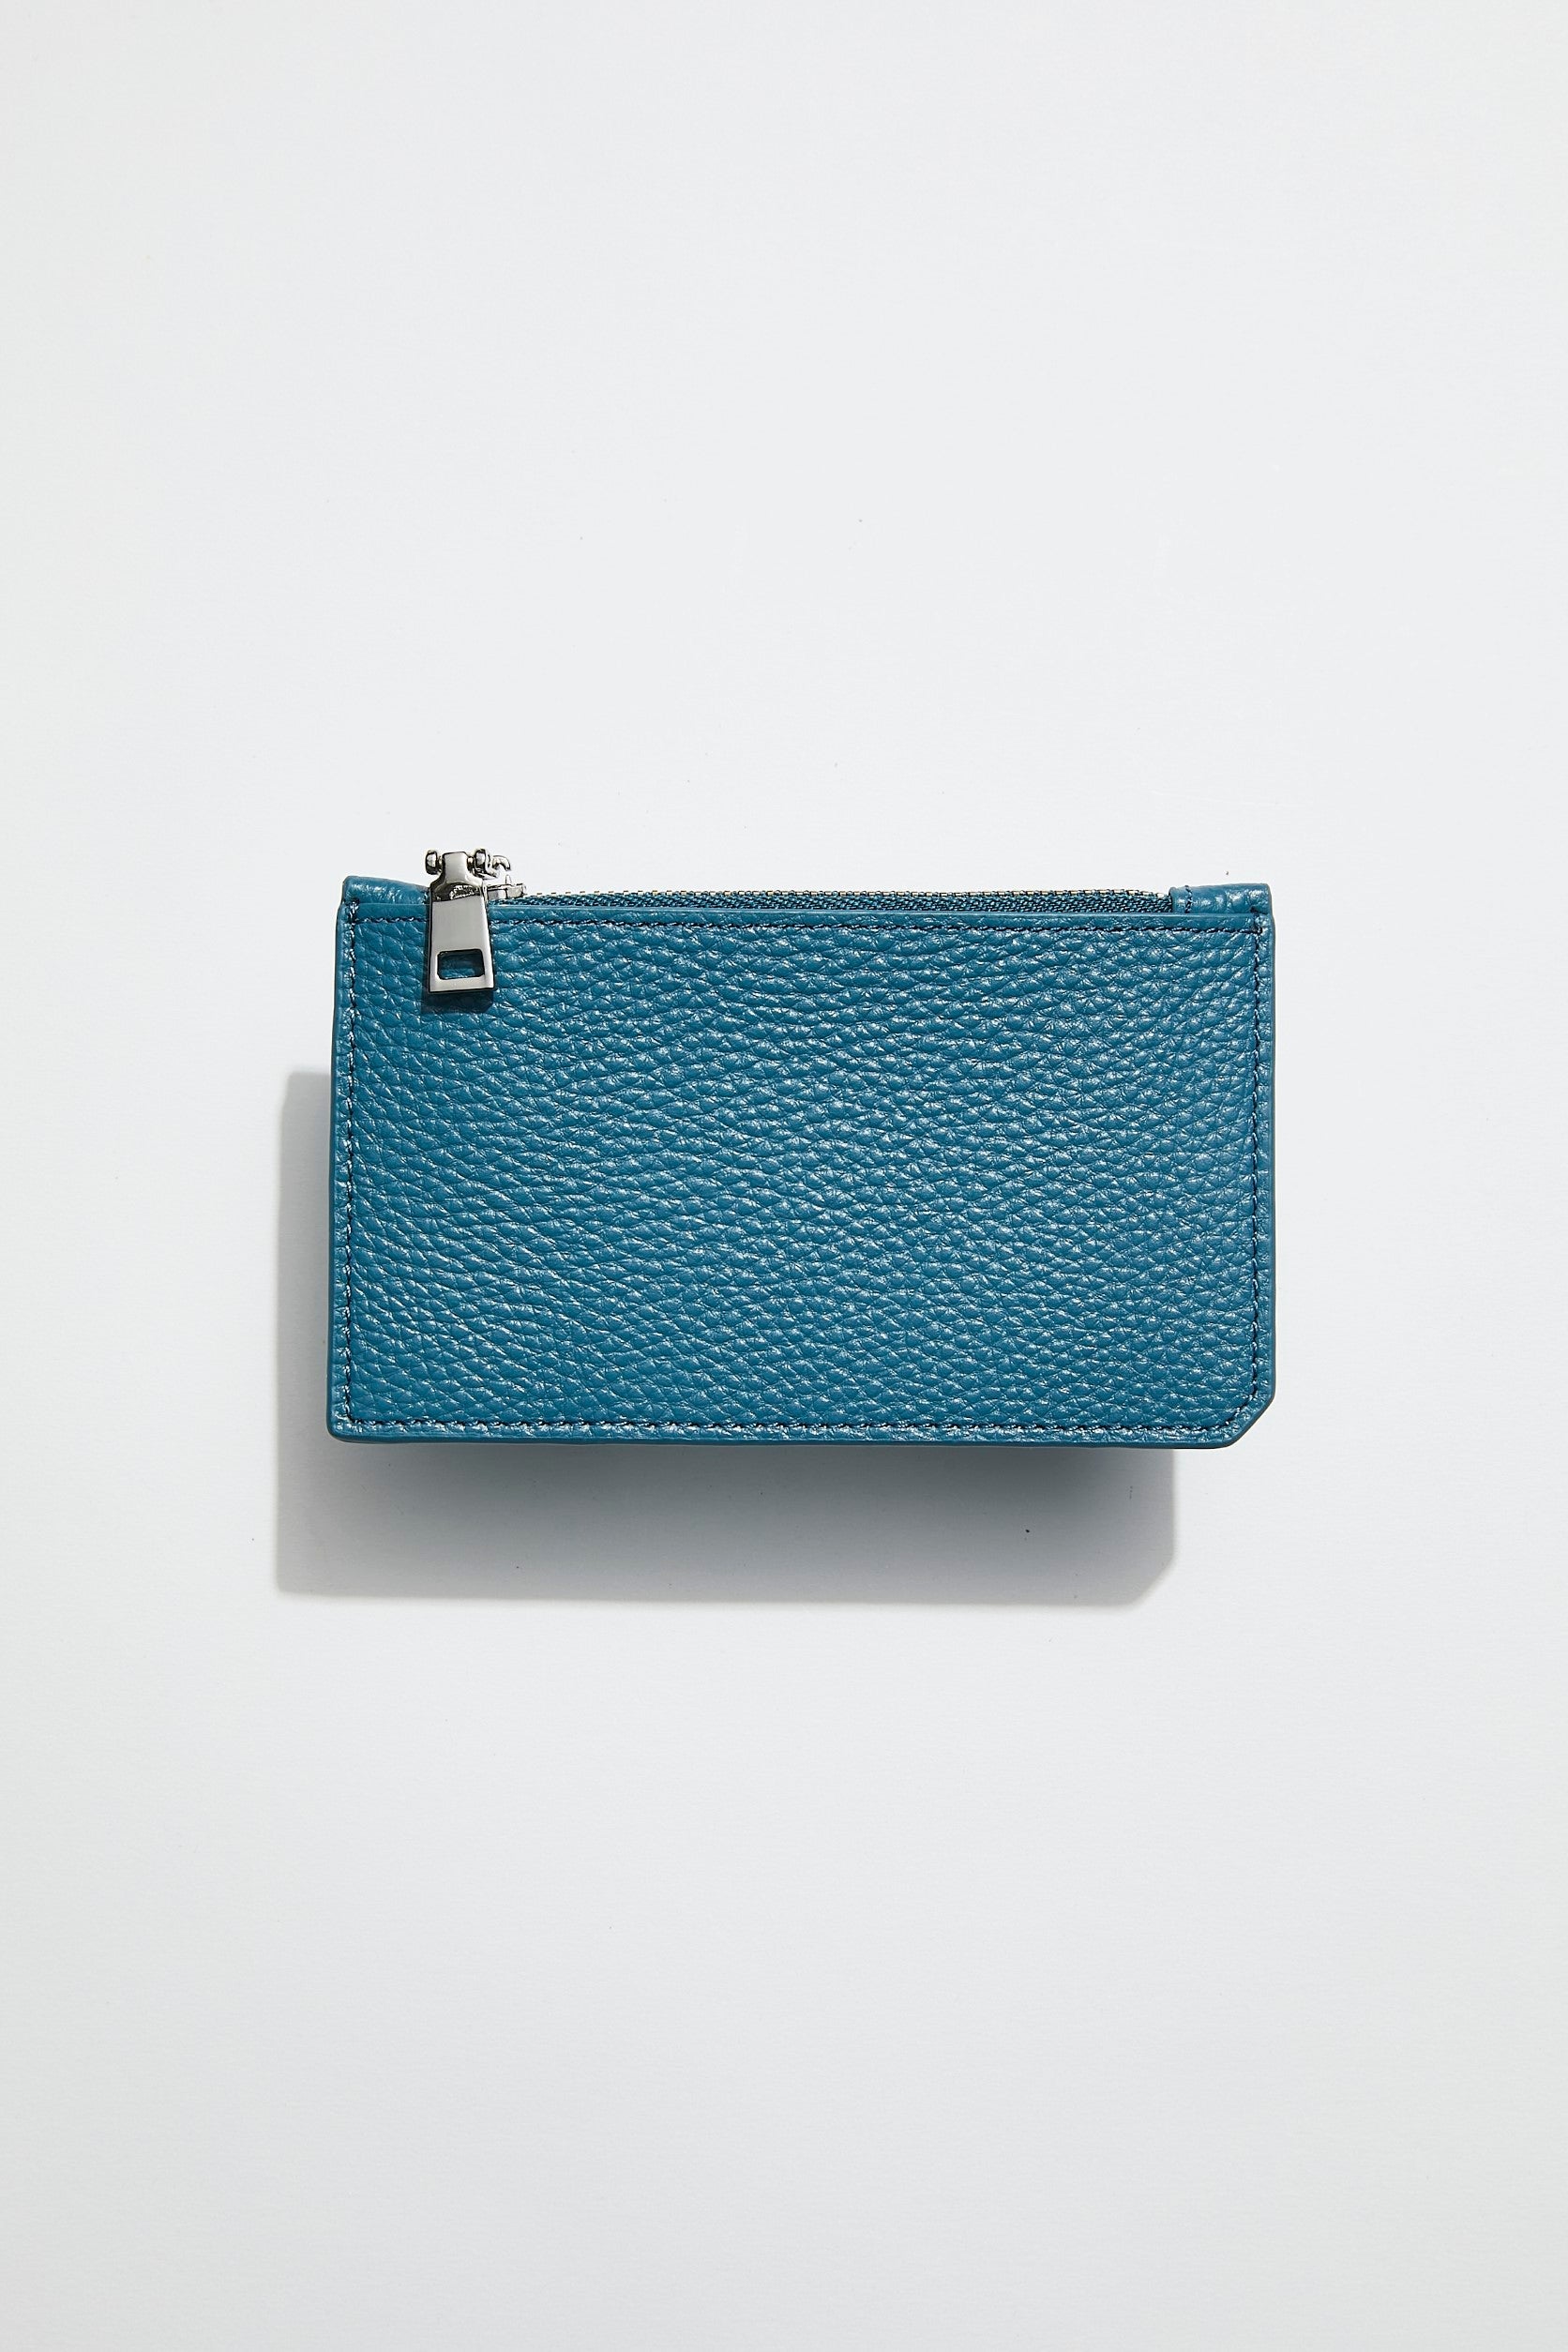 back view of mon purse's sky blue pebbled leather maxi card holder with a  silver zip closure 